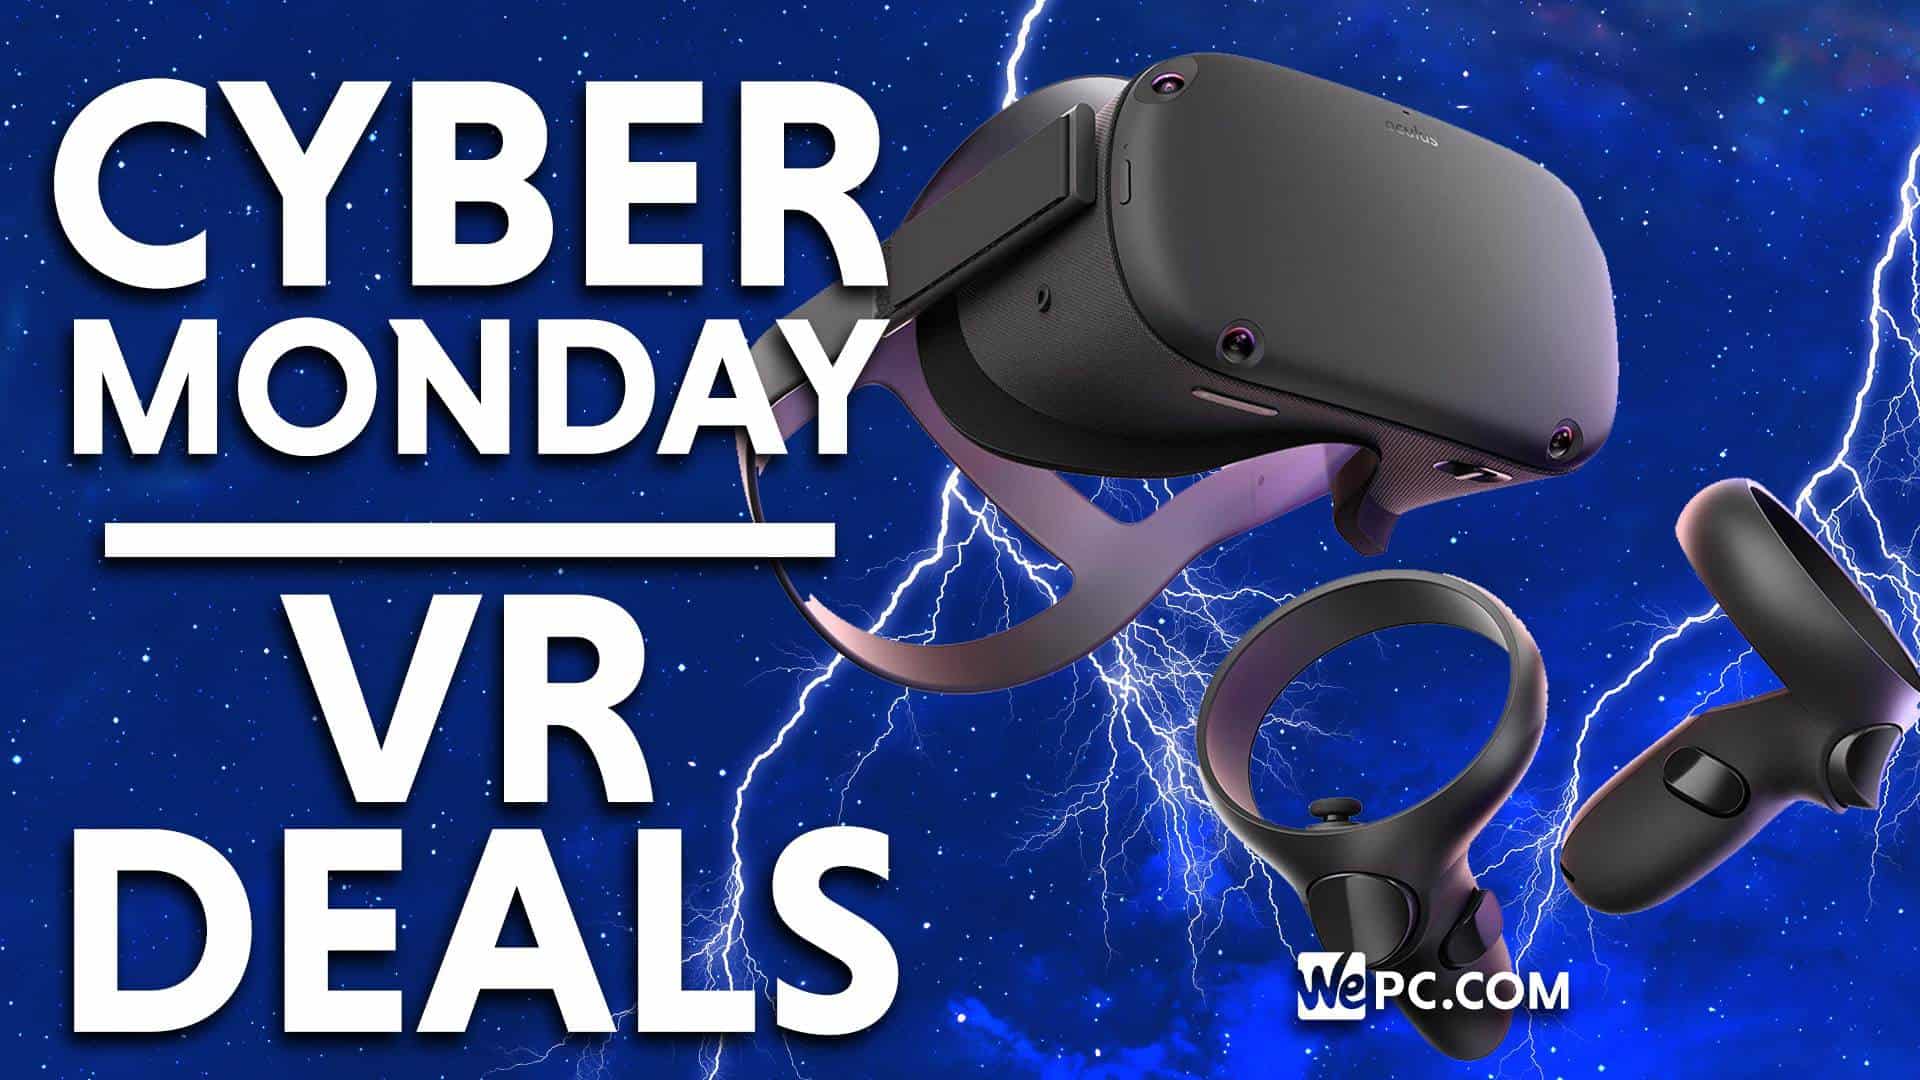 oculus quest cyber monday 2019 price